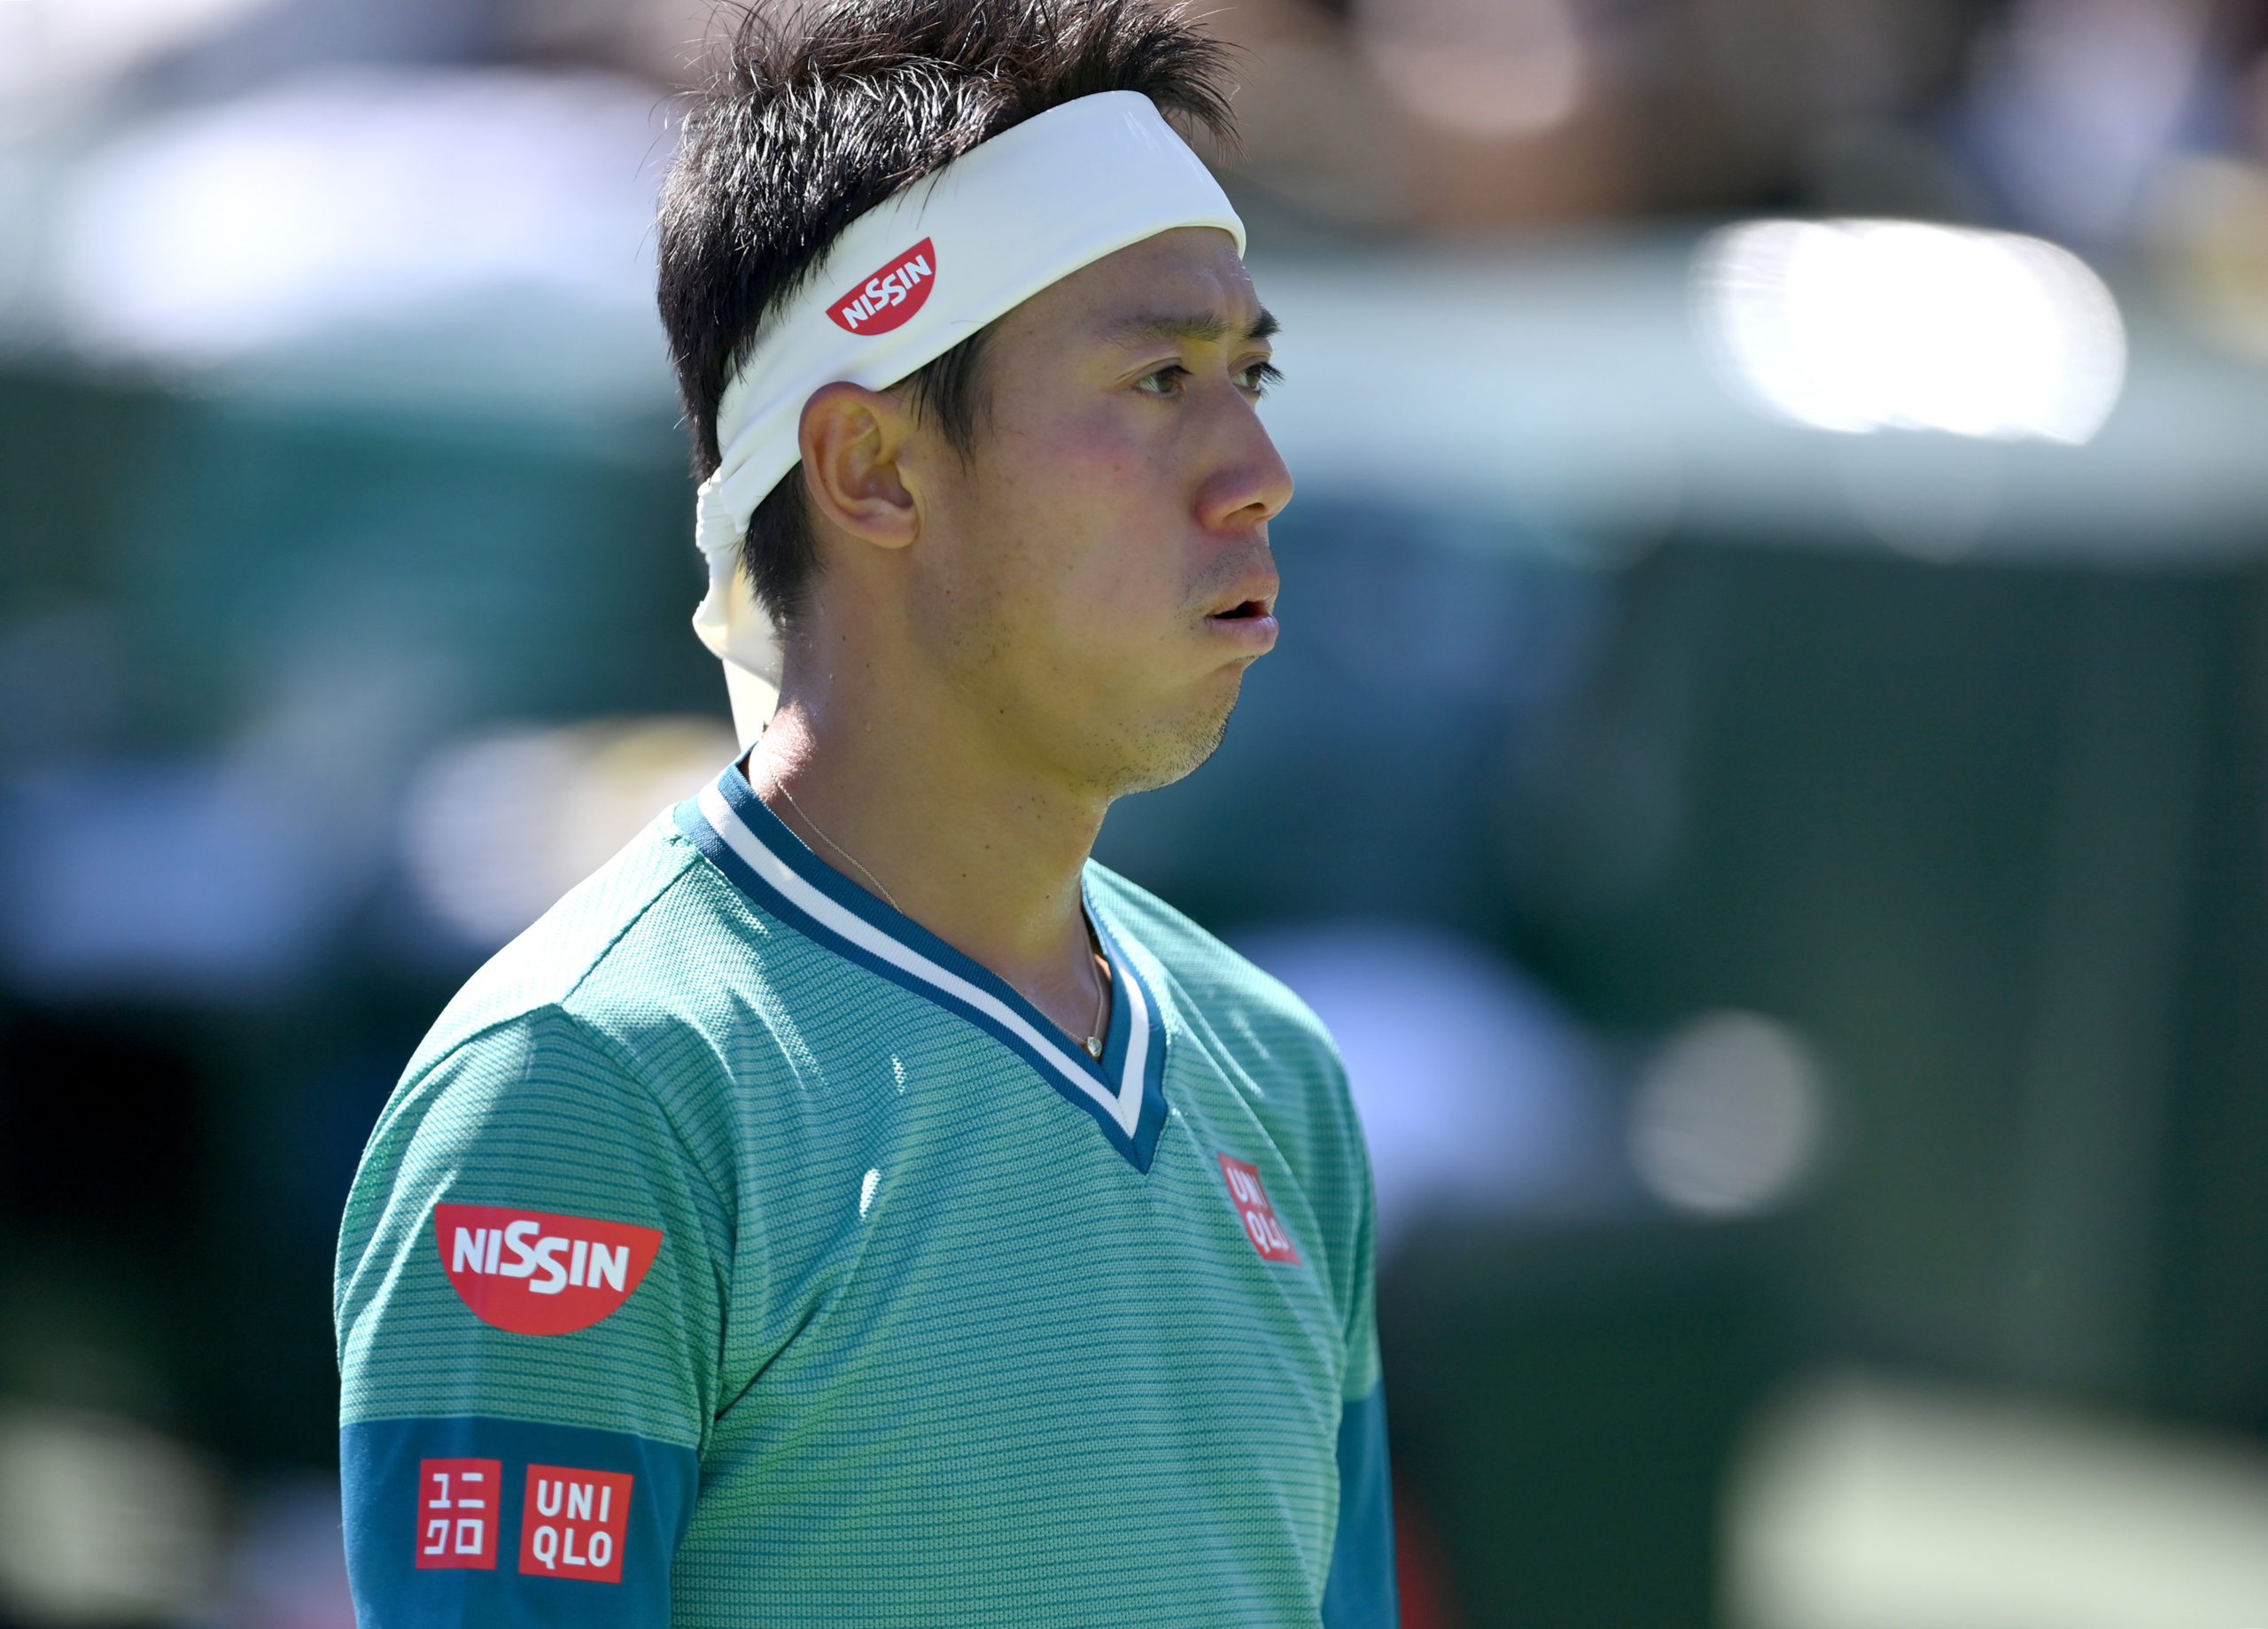 Kei Nishikori (JPN) looks on during his second round match against Daniel Evans (GER) during the BNP Paribas Open at the Indian Wells Tennis Garden. 